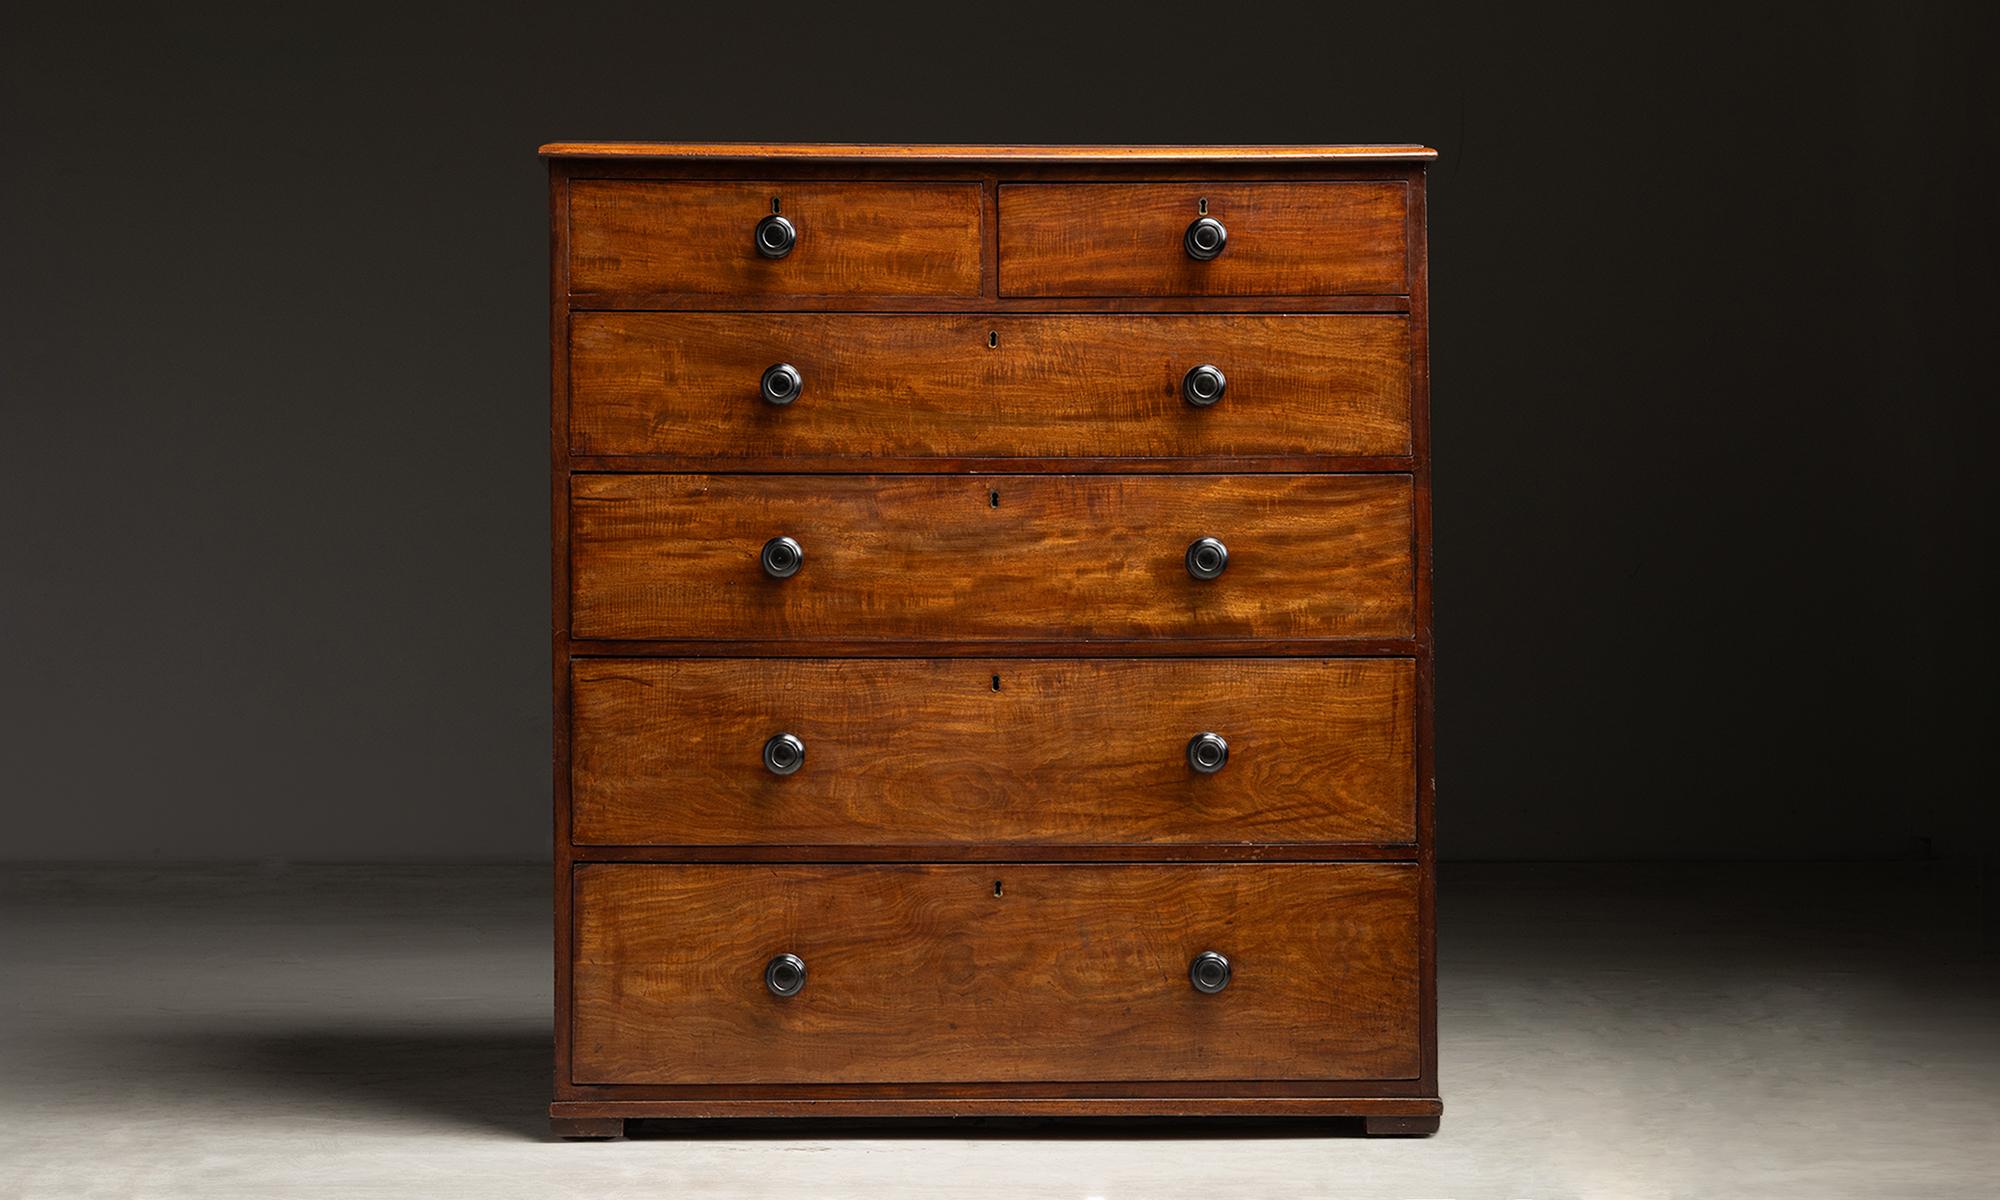 England circa 1890
Constructed in mahogany with original ebony handles and blue paper lining.
43.25”w x 21”d x 47”h